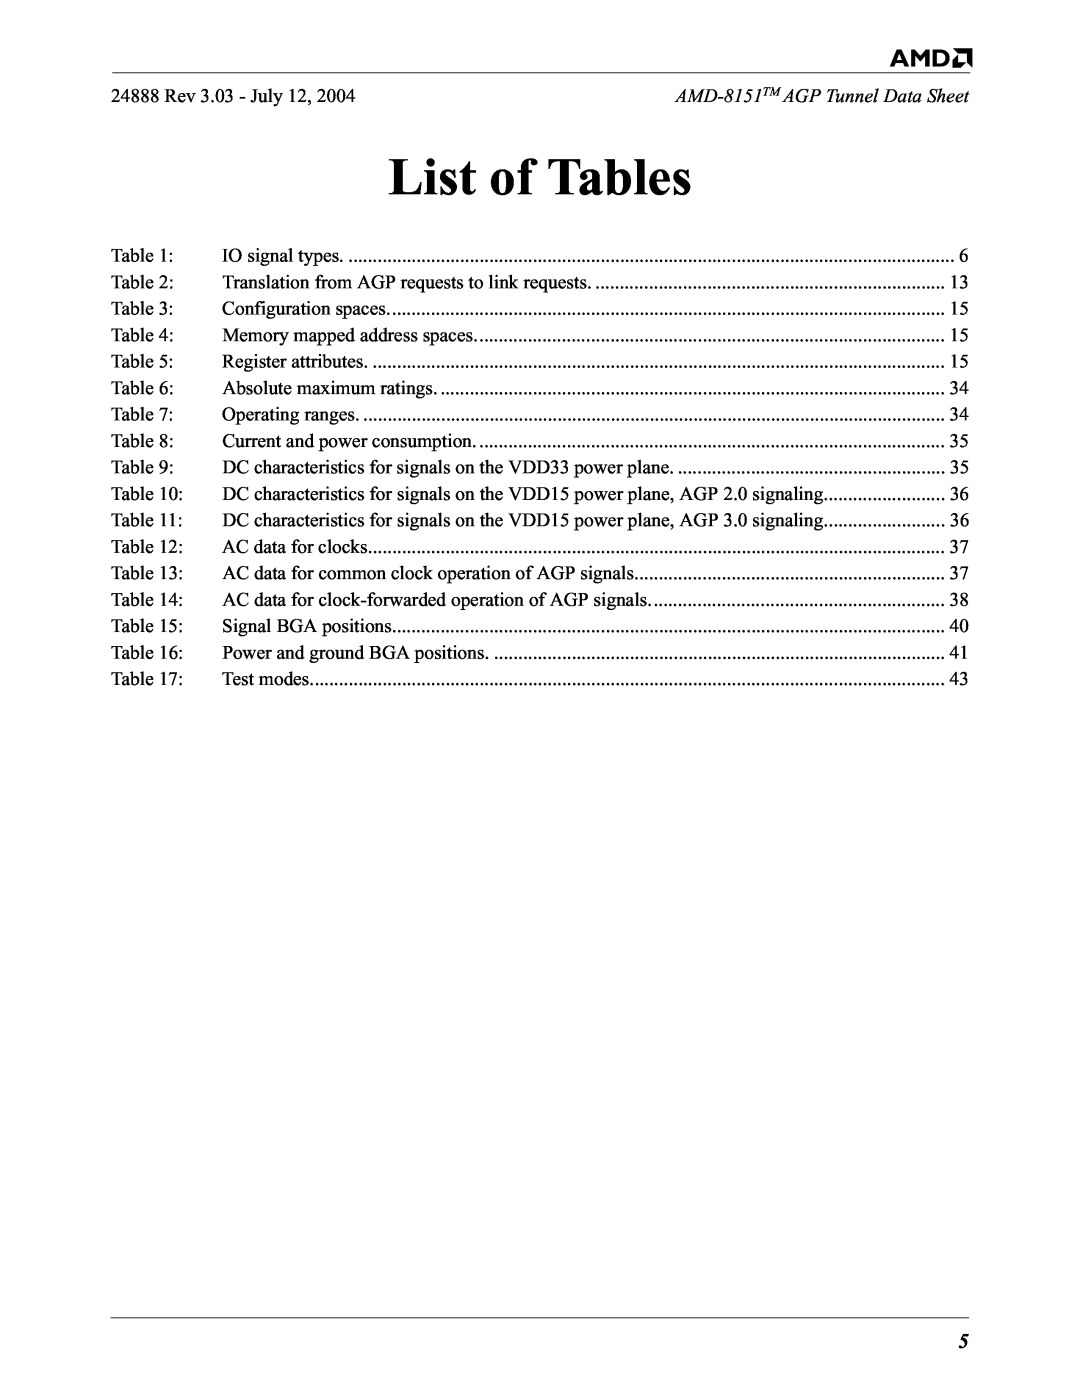 AMD 8151 specifications List of Tables 